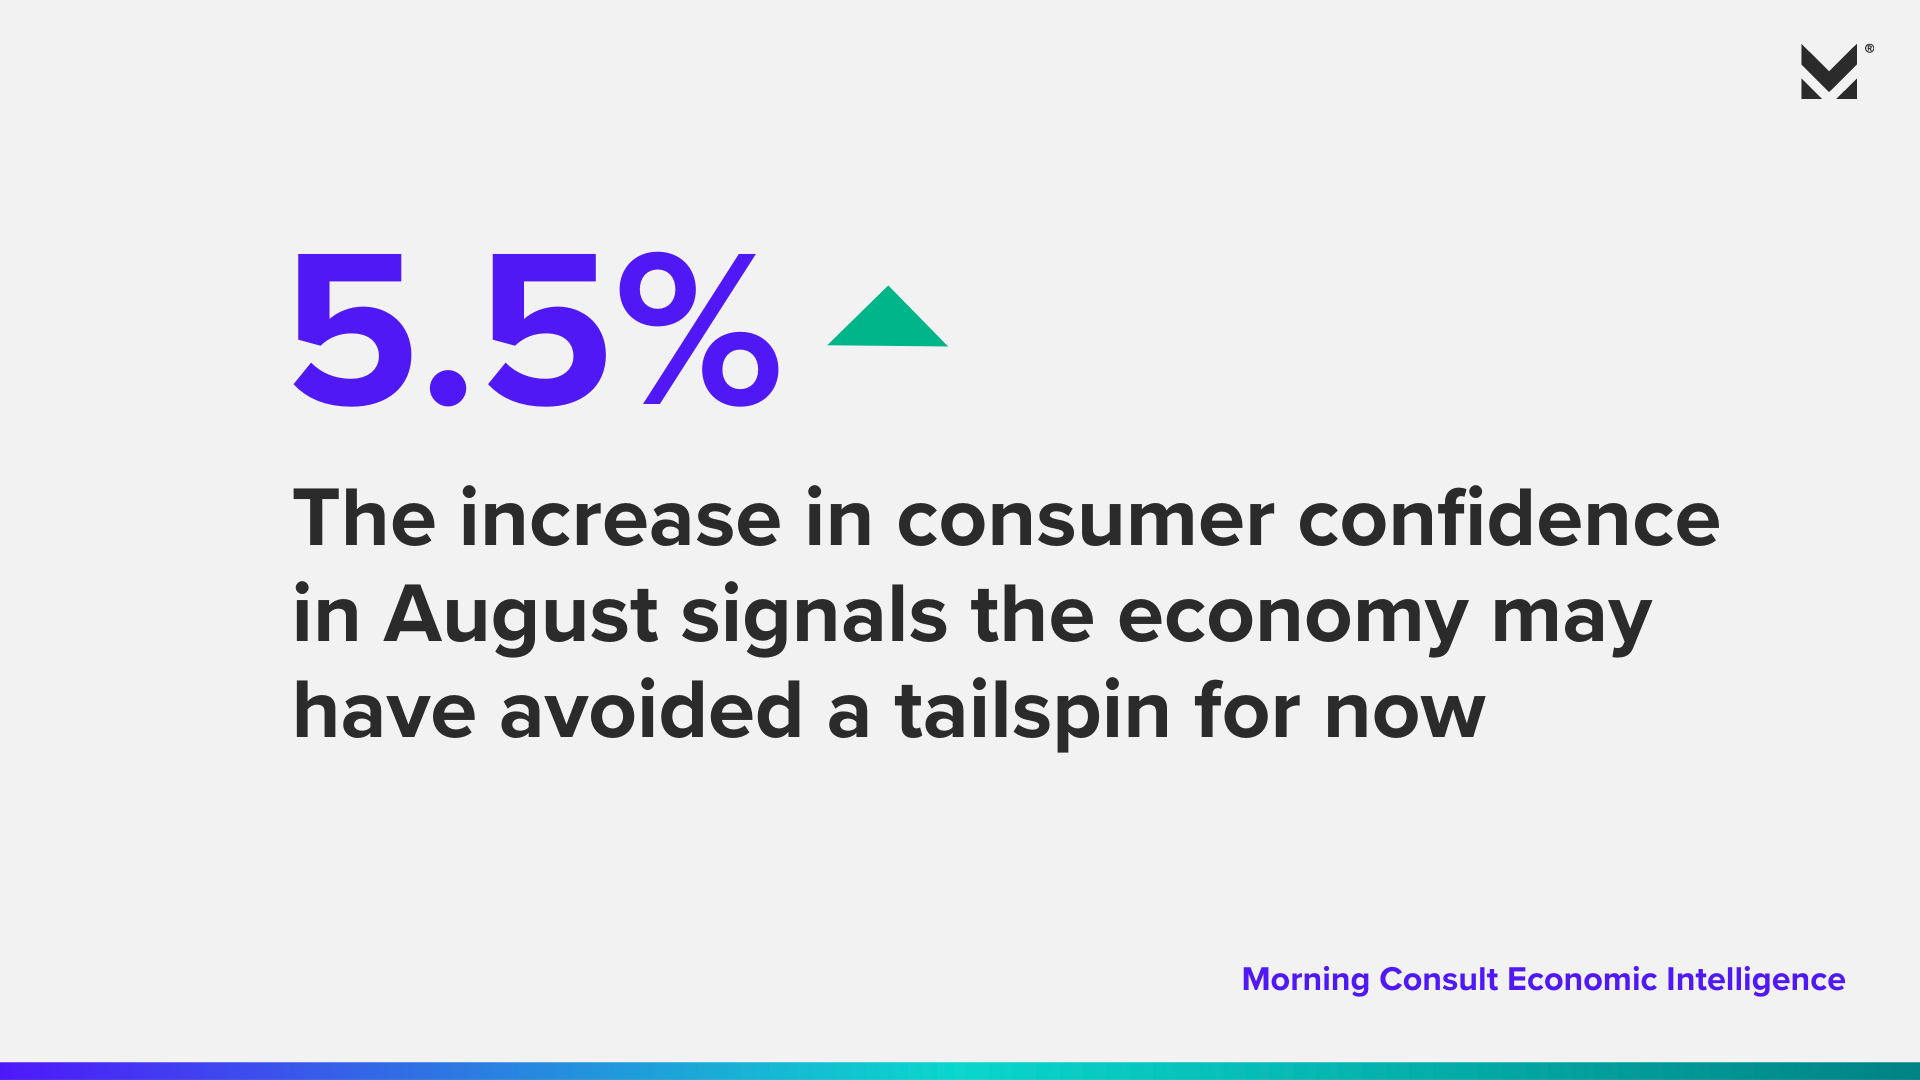 The increase in consumer confidence in August signals the economy may have avoided a tailspin for now.